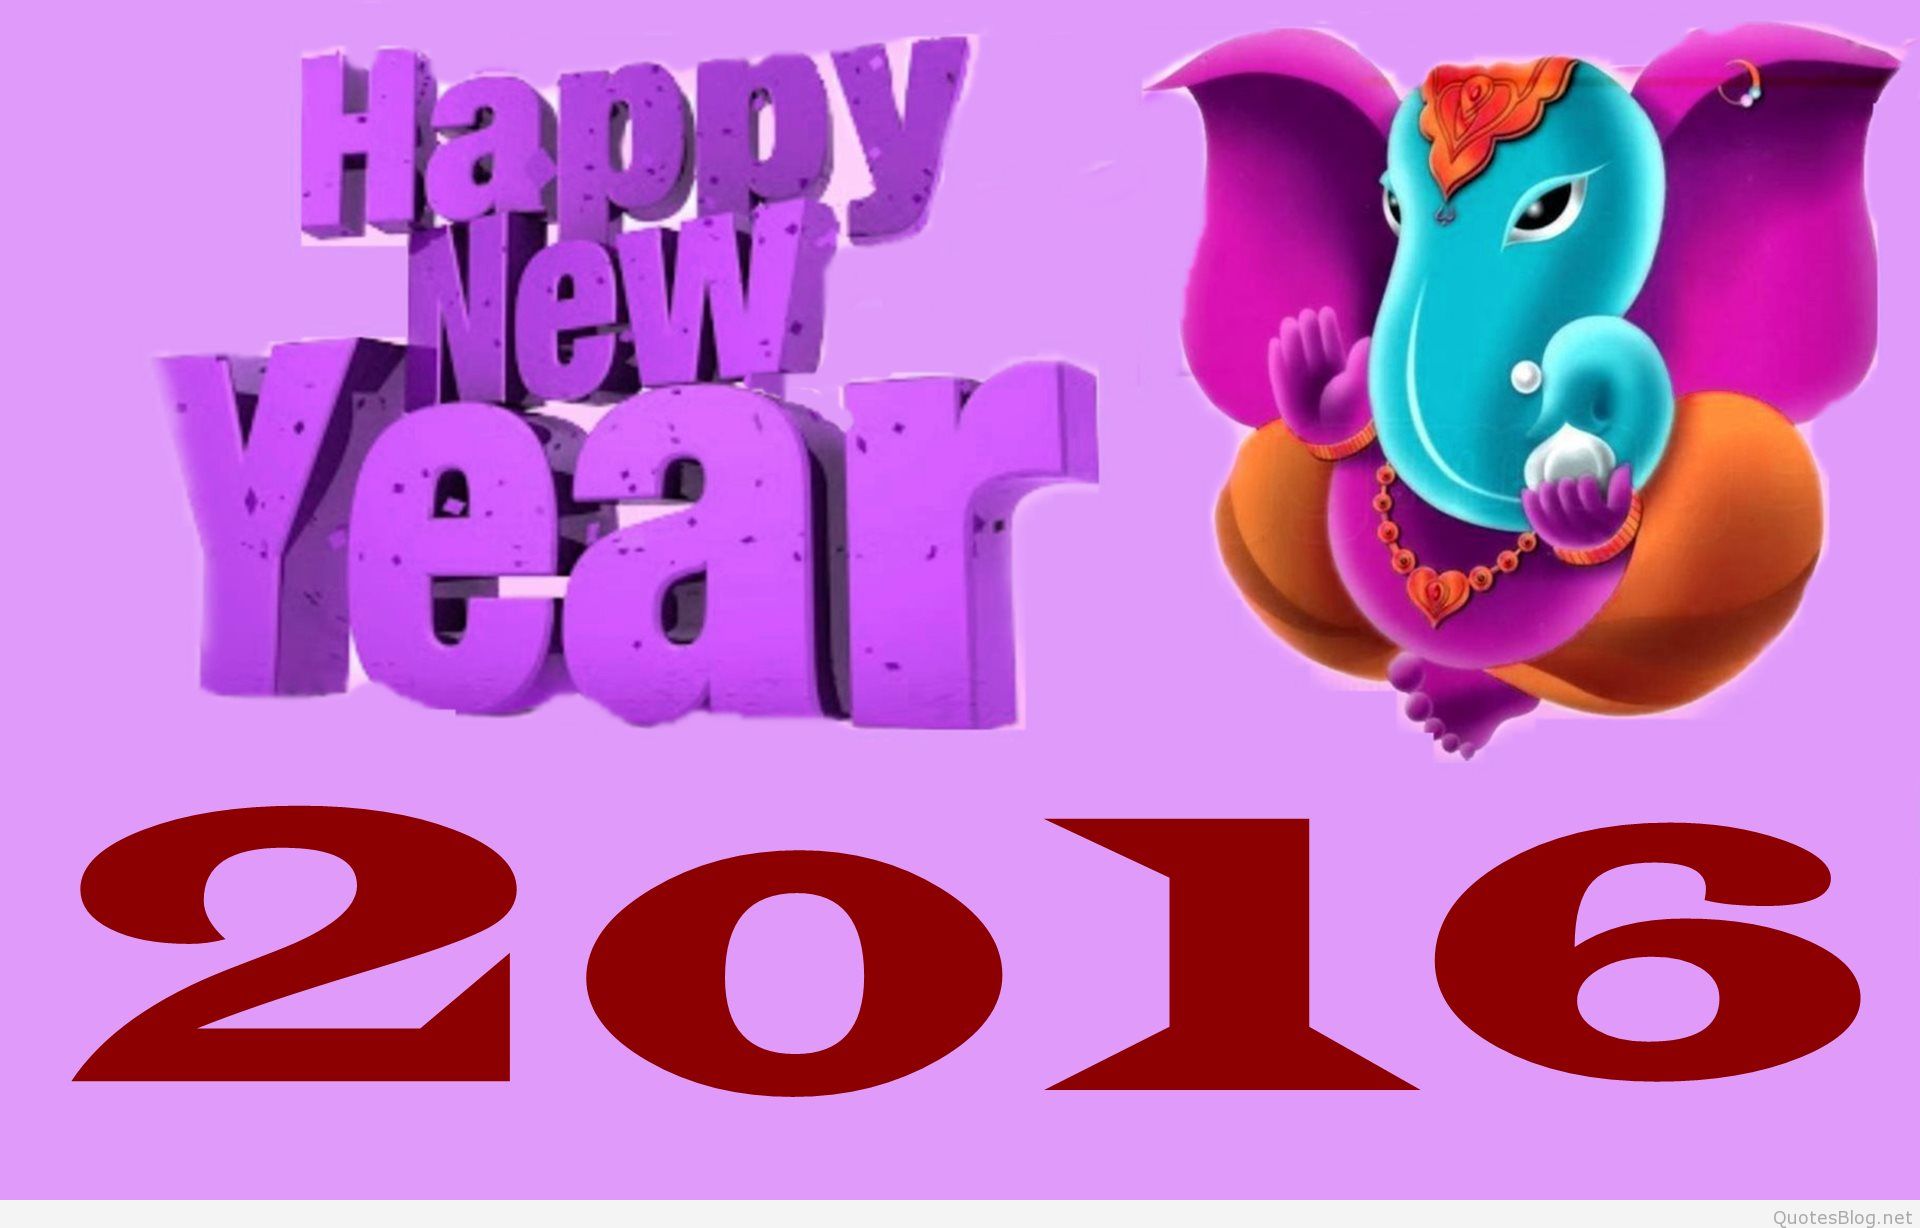 Happy new year sayings wallpapers 2016 2017 1920x1228